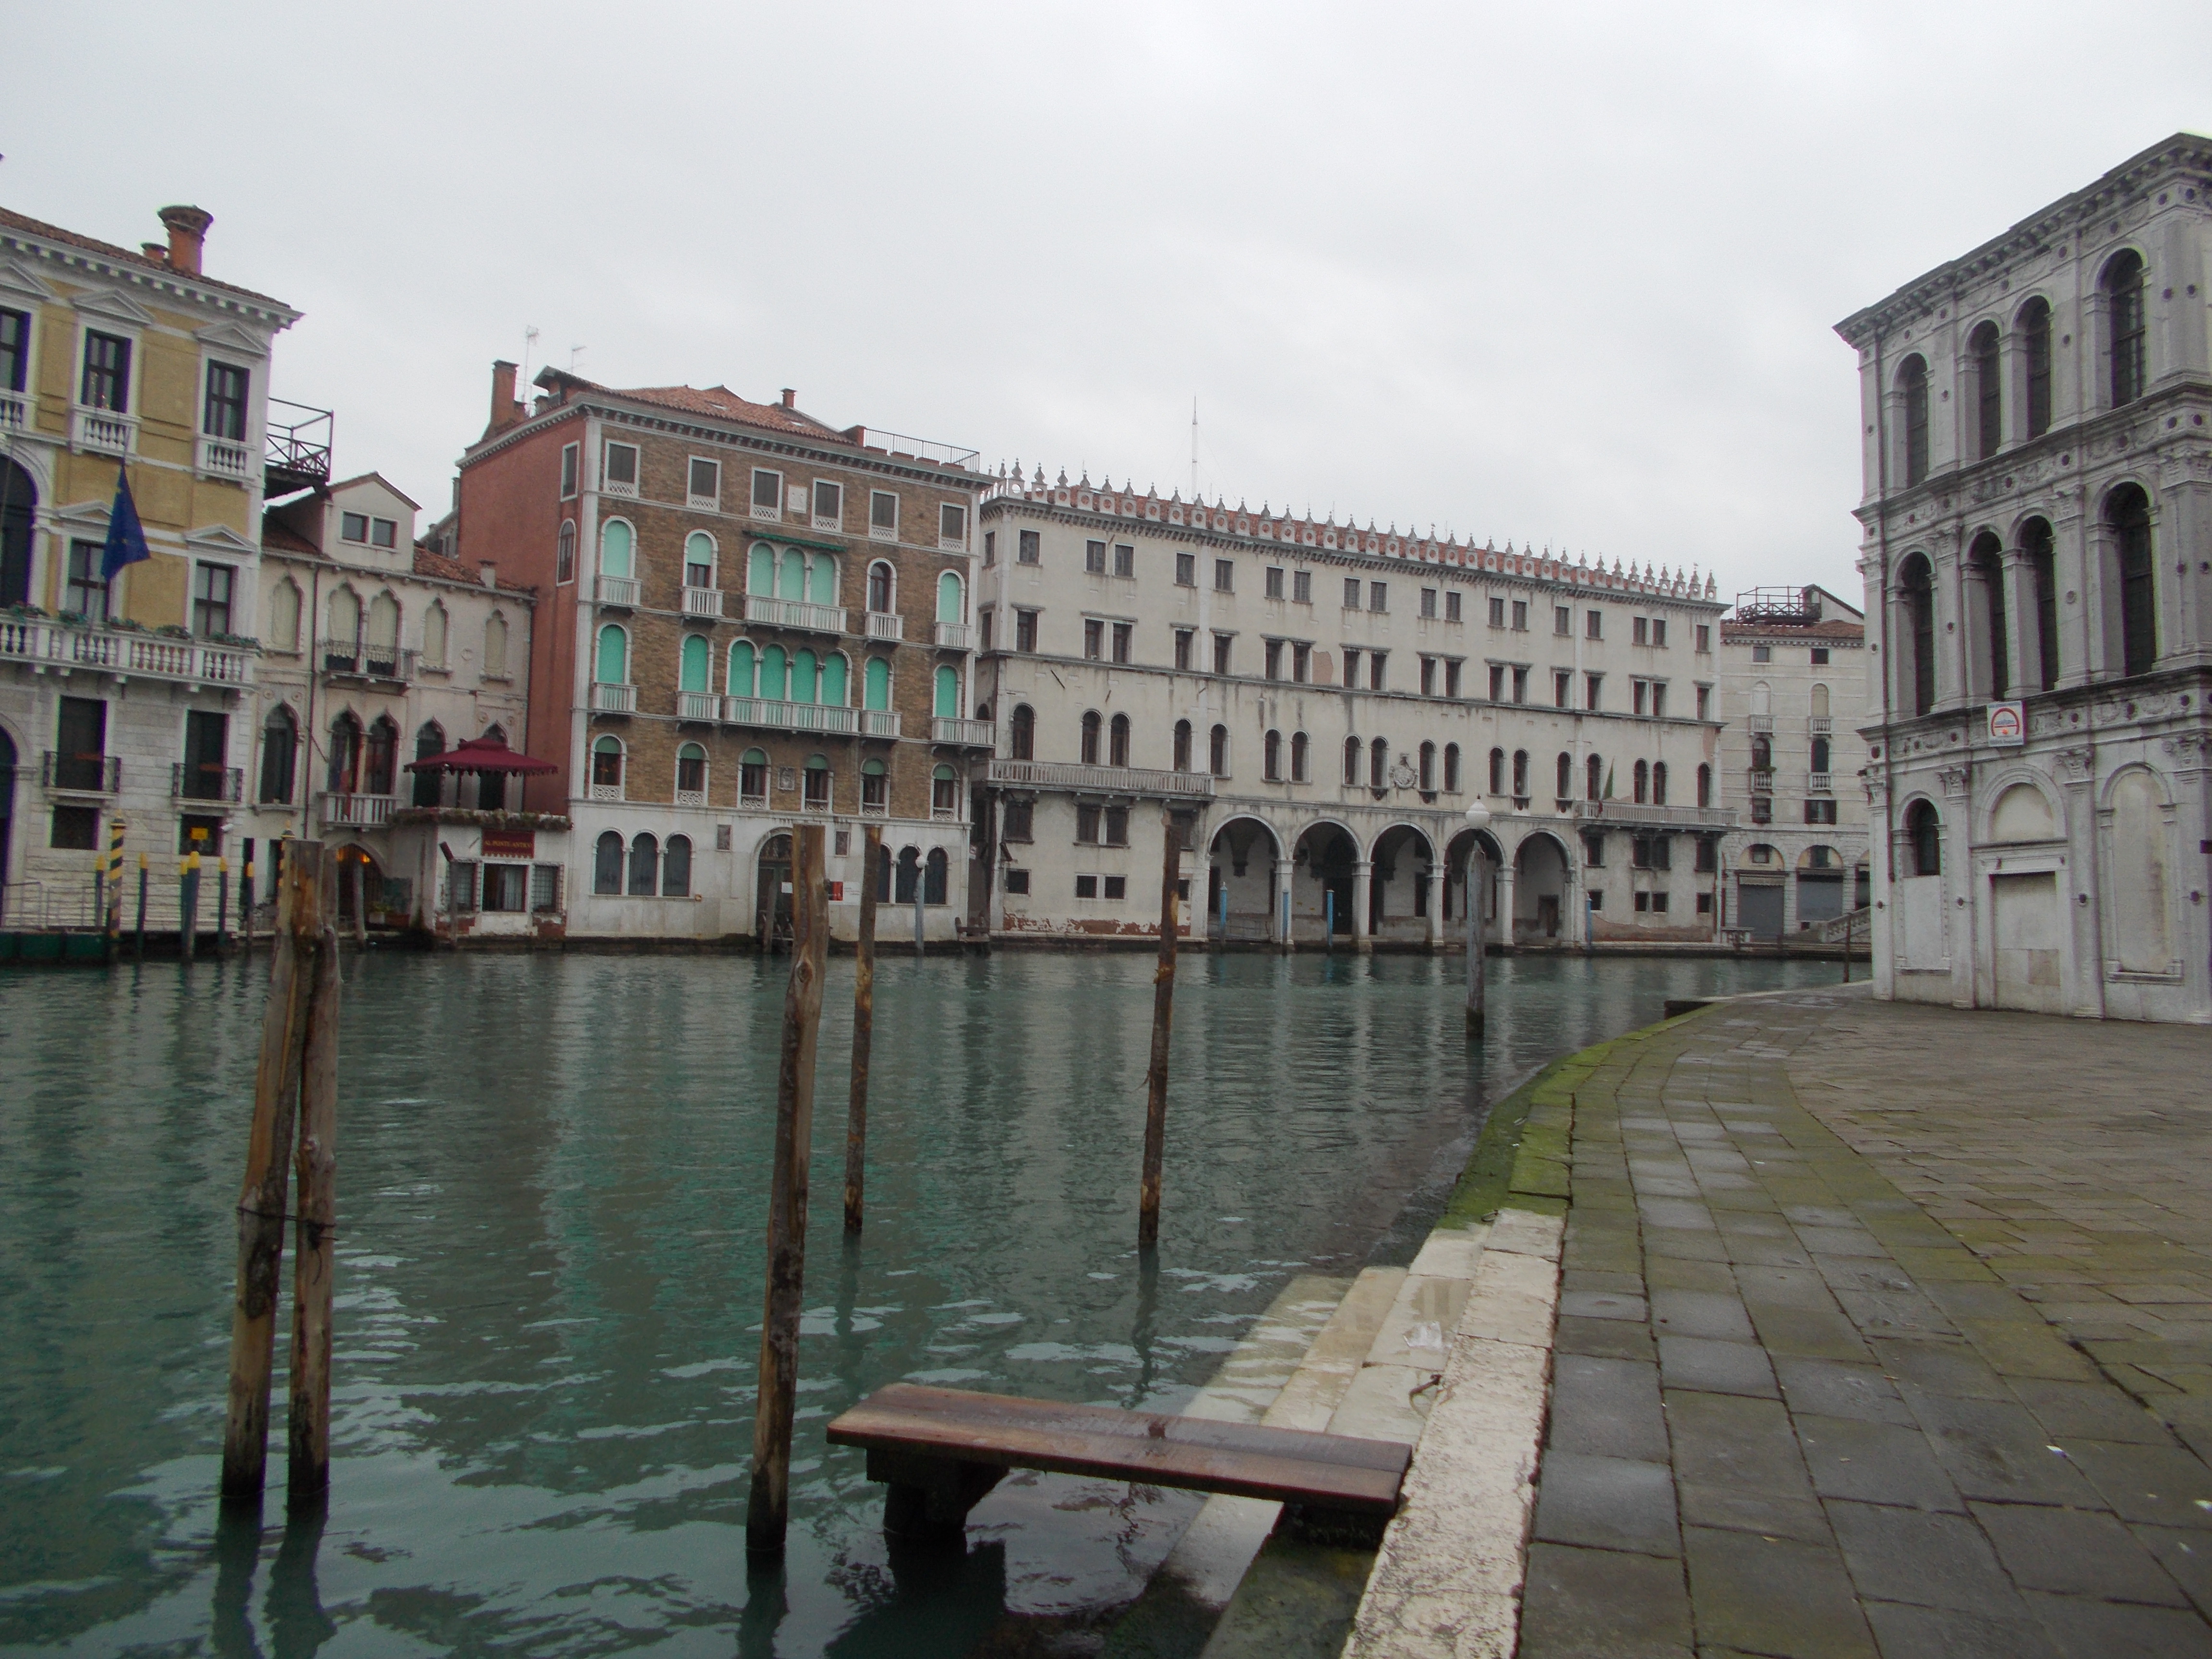 A cold gray early morning in Venice - quiet and spellbinding.